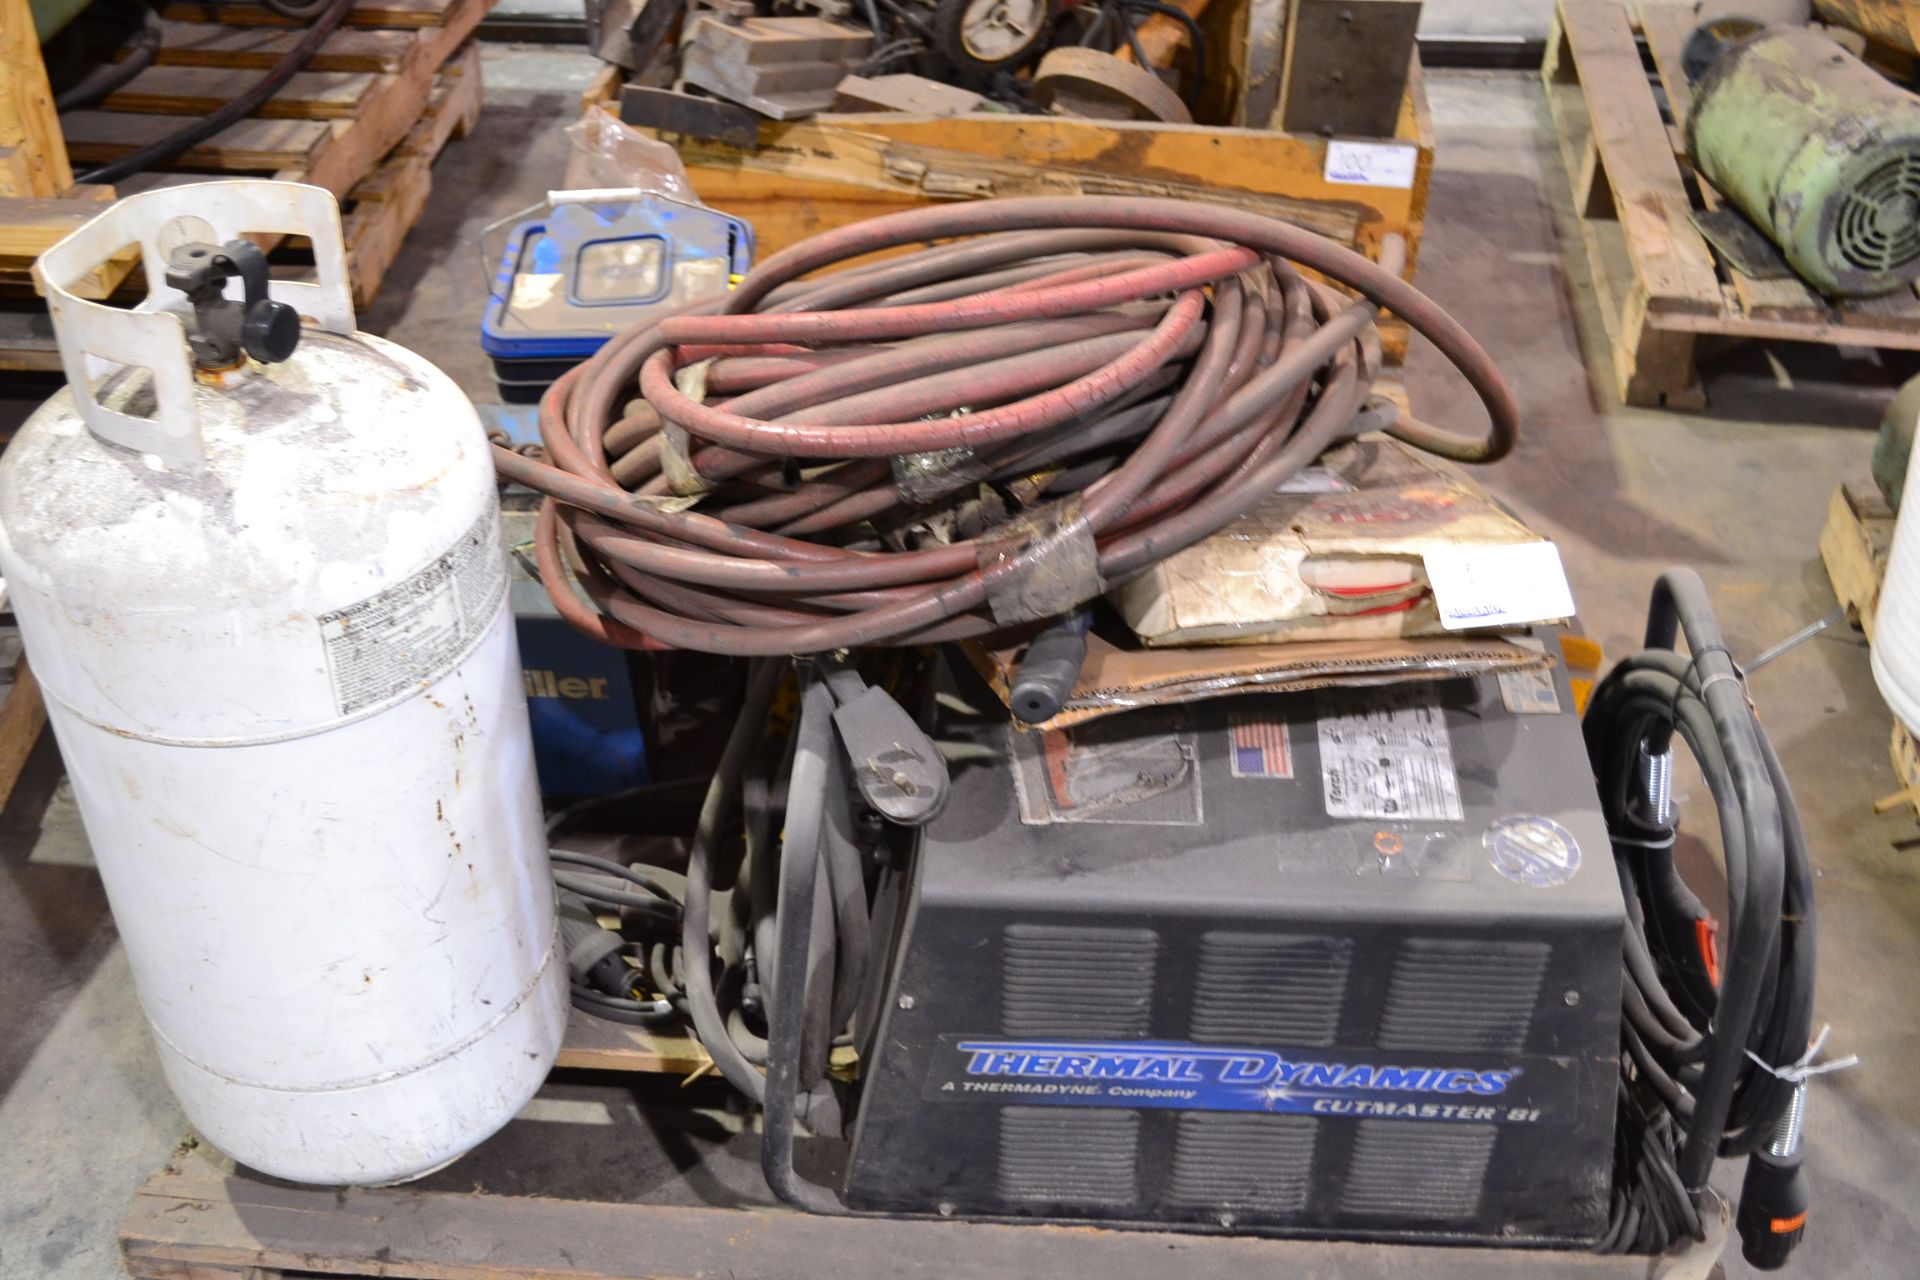 SKID OF PLASMA CUTTER, THERMAL DYNAMICS, CUTMASTER 81, ELECTRIC HOIST, CABLE REEL, AIR HOSES,